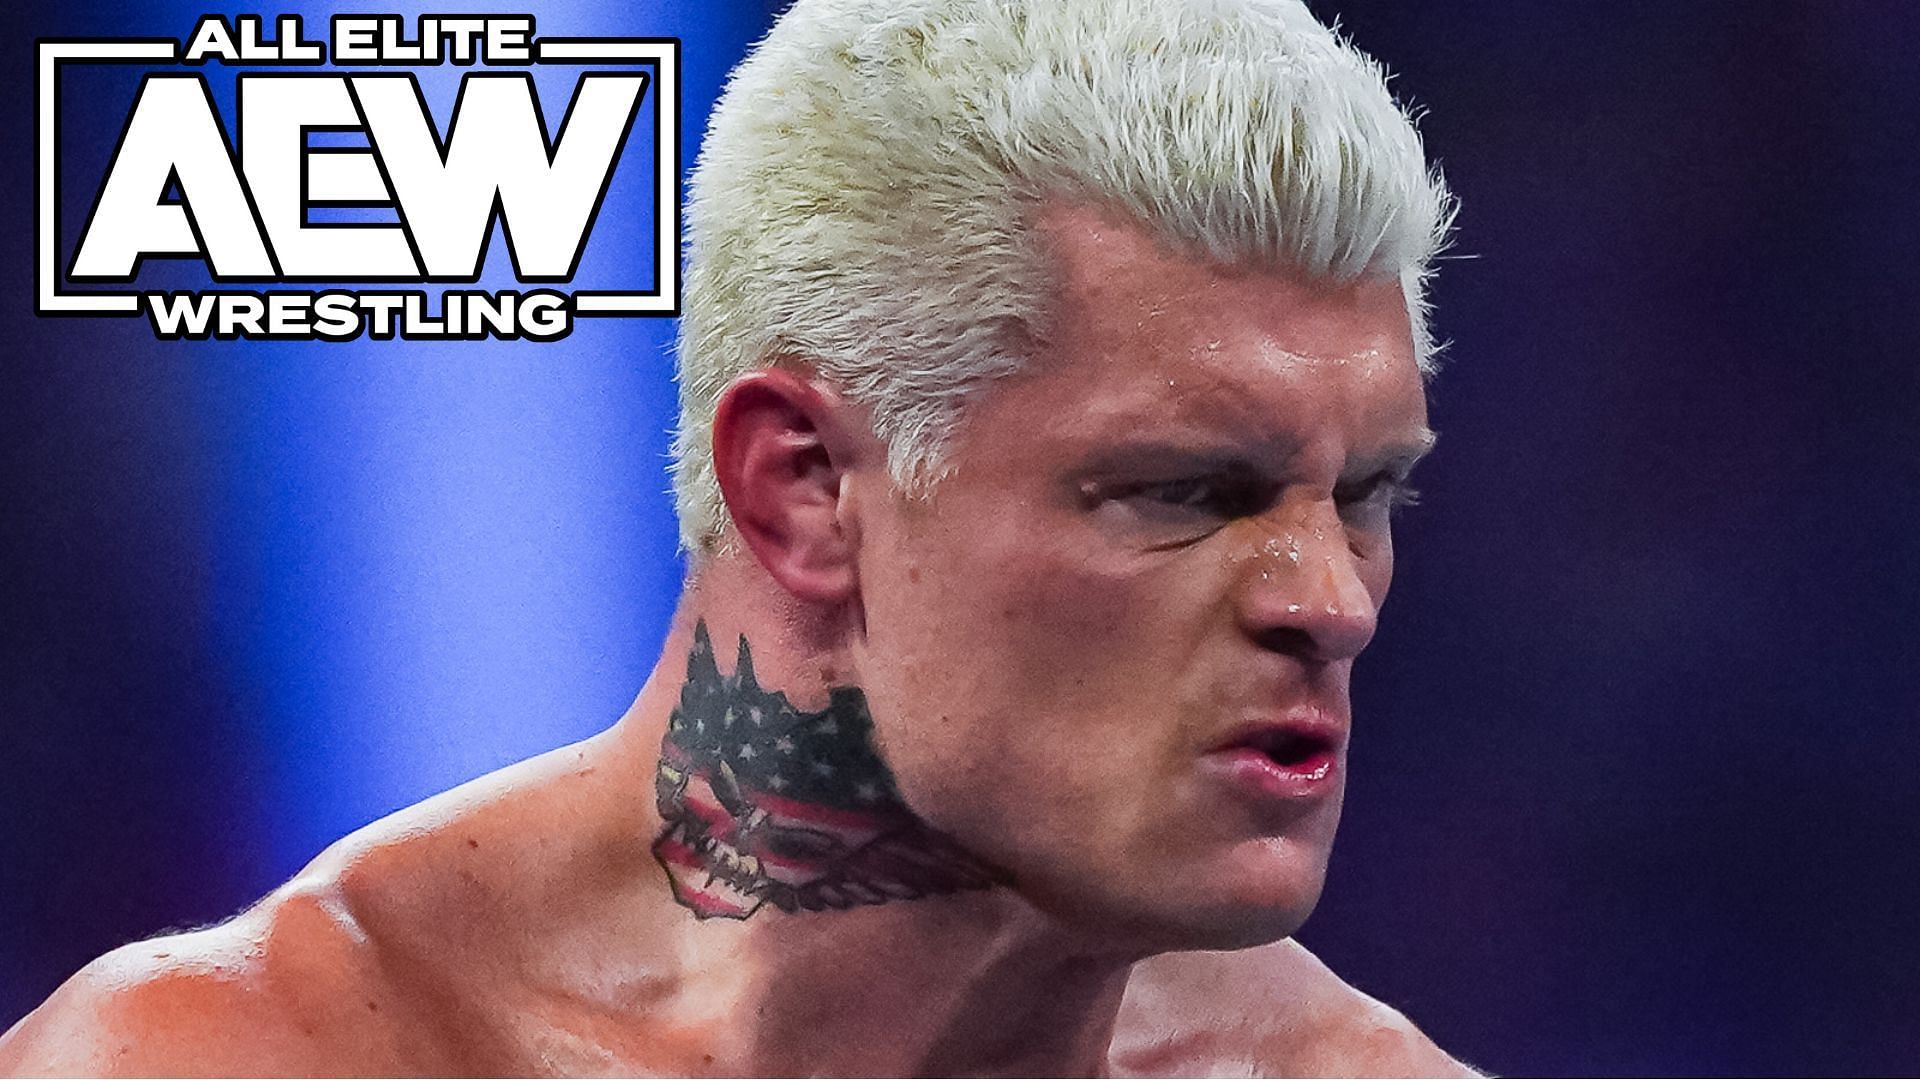 Did Cody Rhodes have a worse WrestleMania than his recent clash against Roman Reigns?